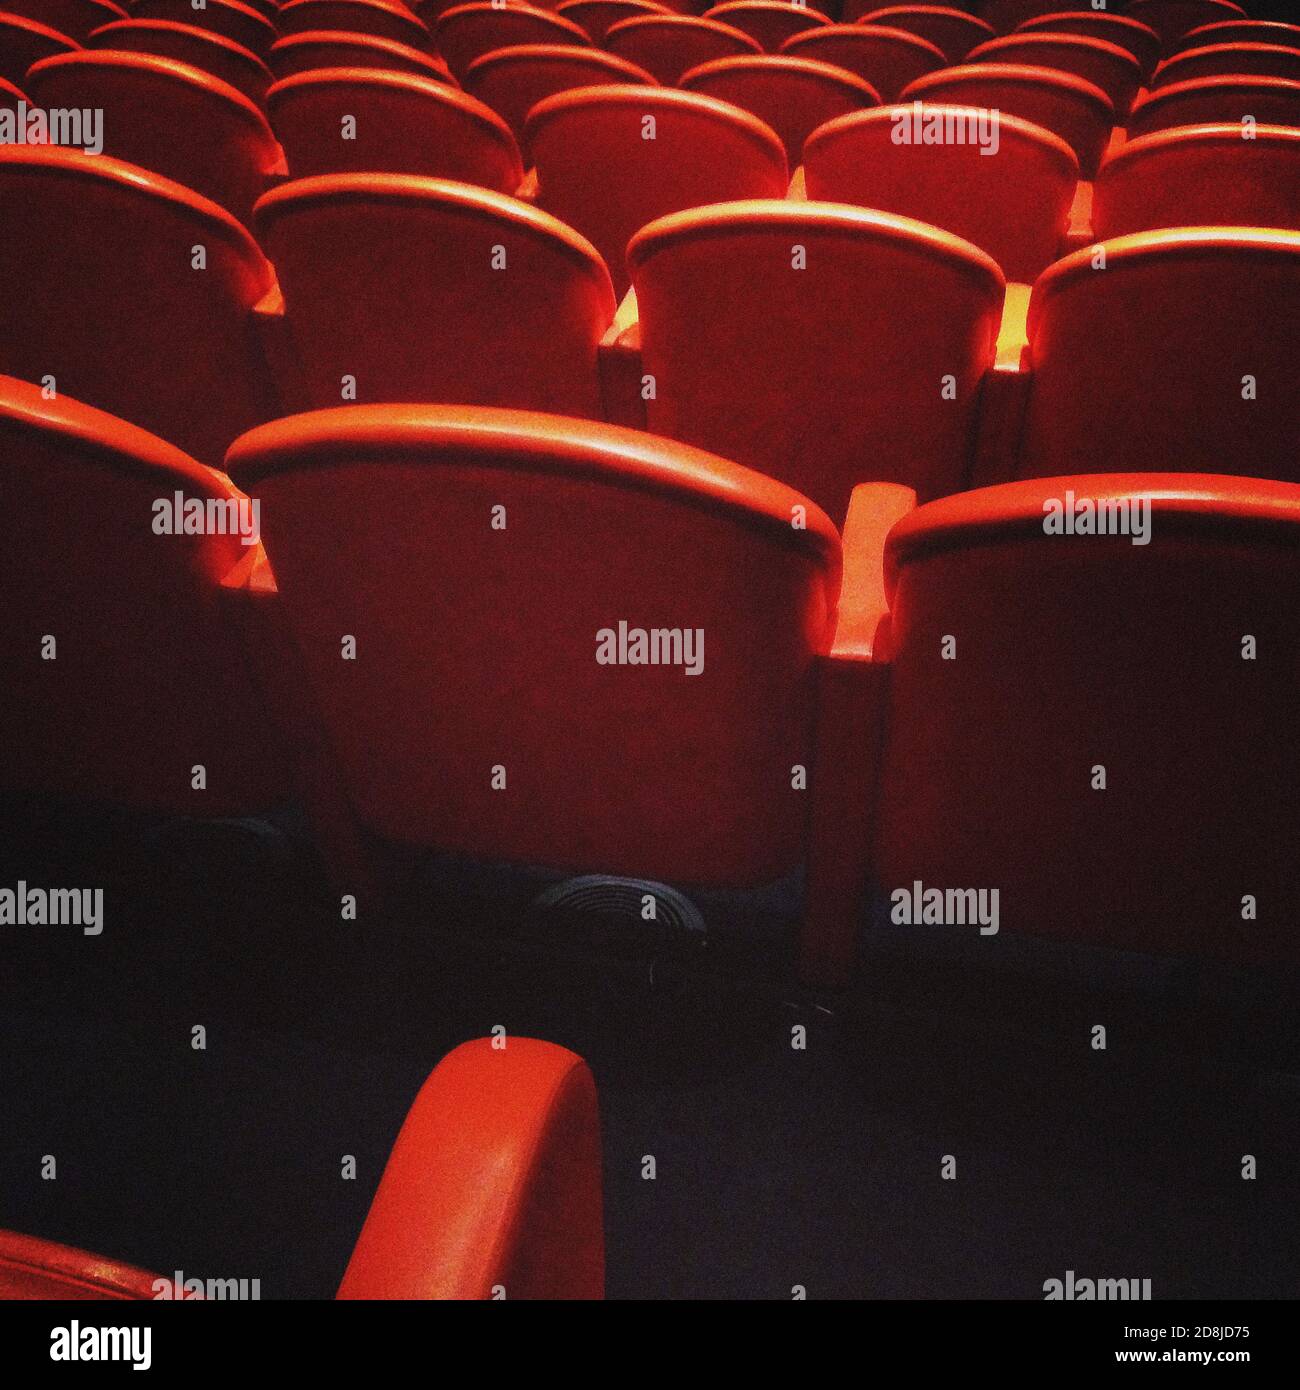 Red Theater Seats Stock Photo